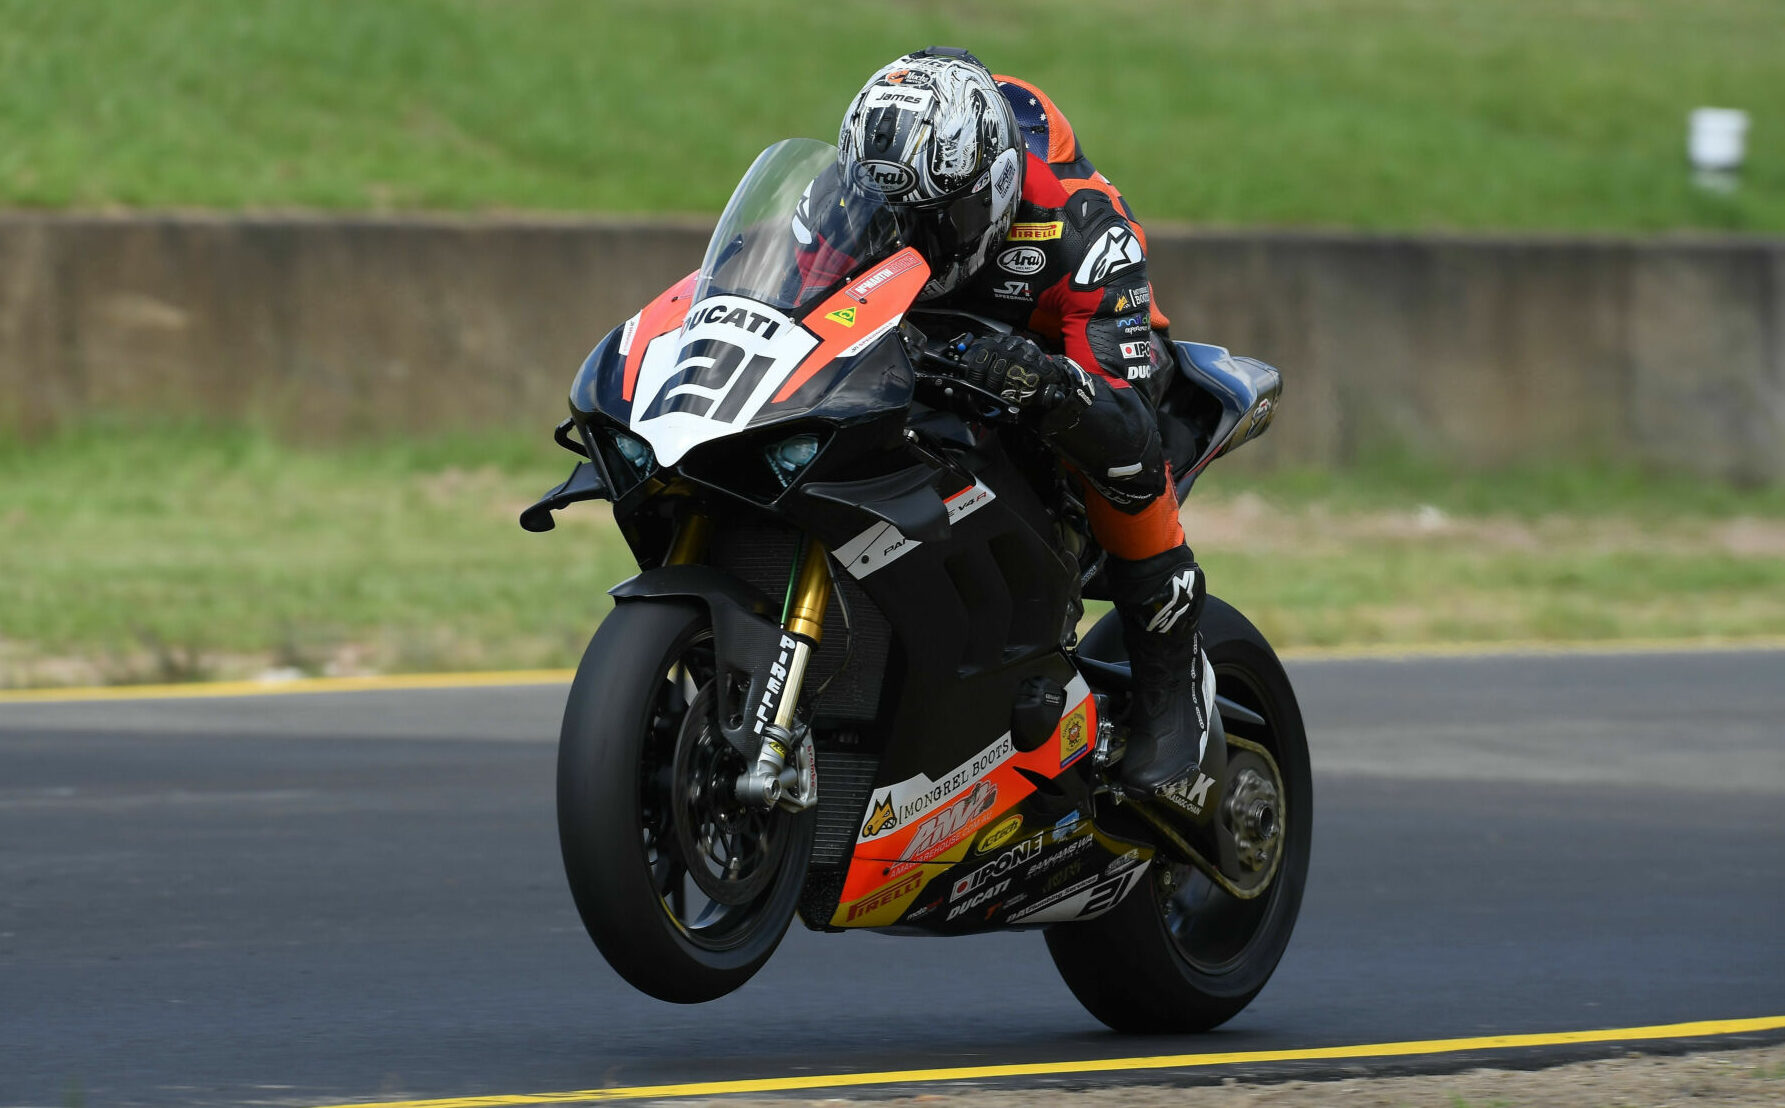 Josh Waters (21) at speed on his Ducati Panigale V4 R Superbike. Photo courtesy ASBK.